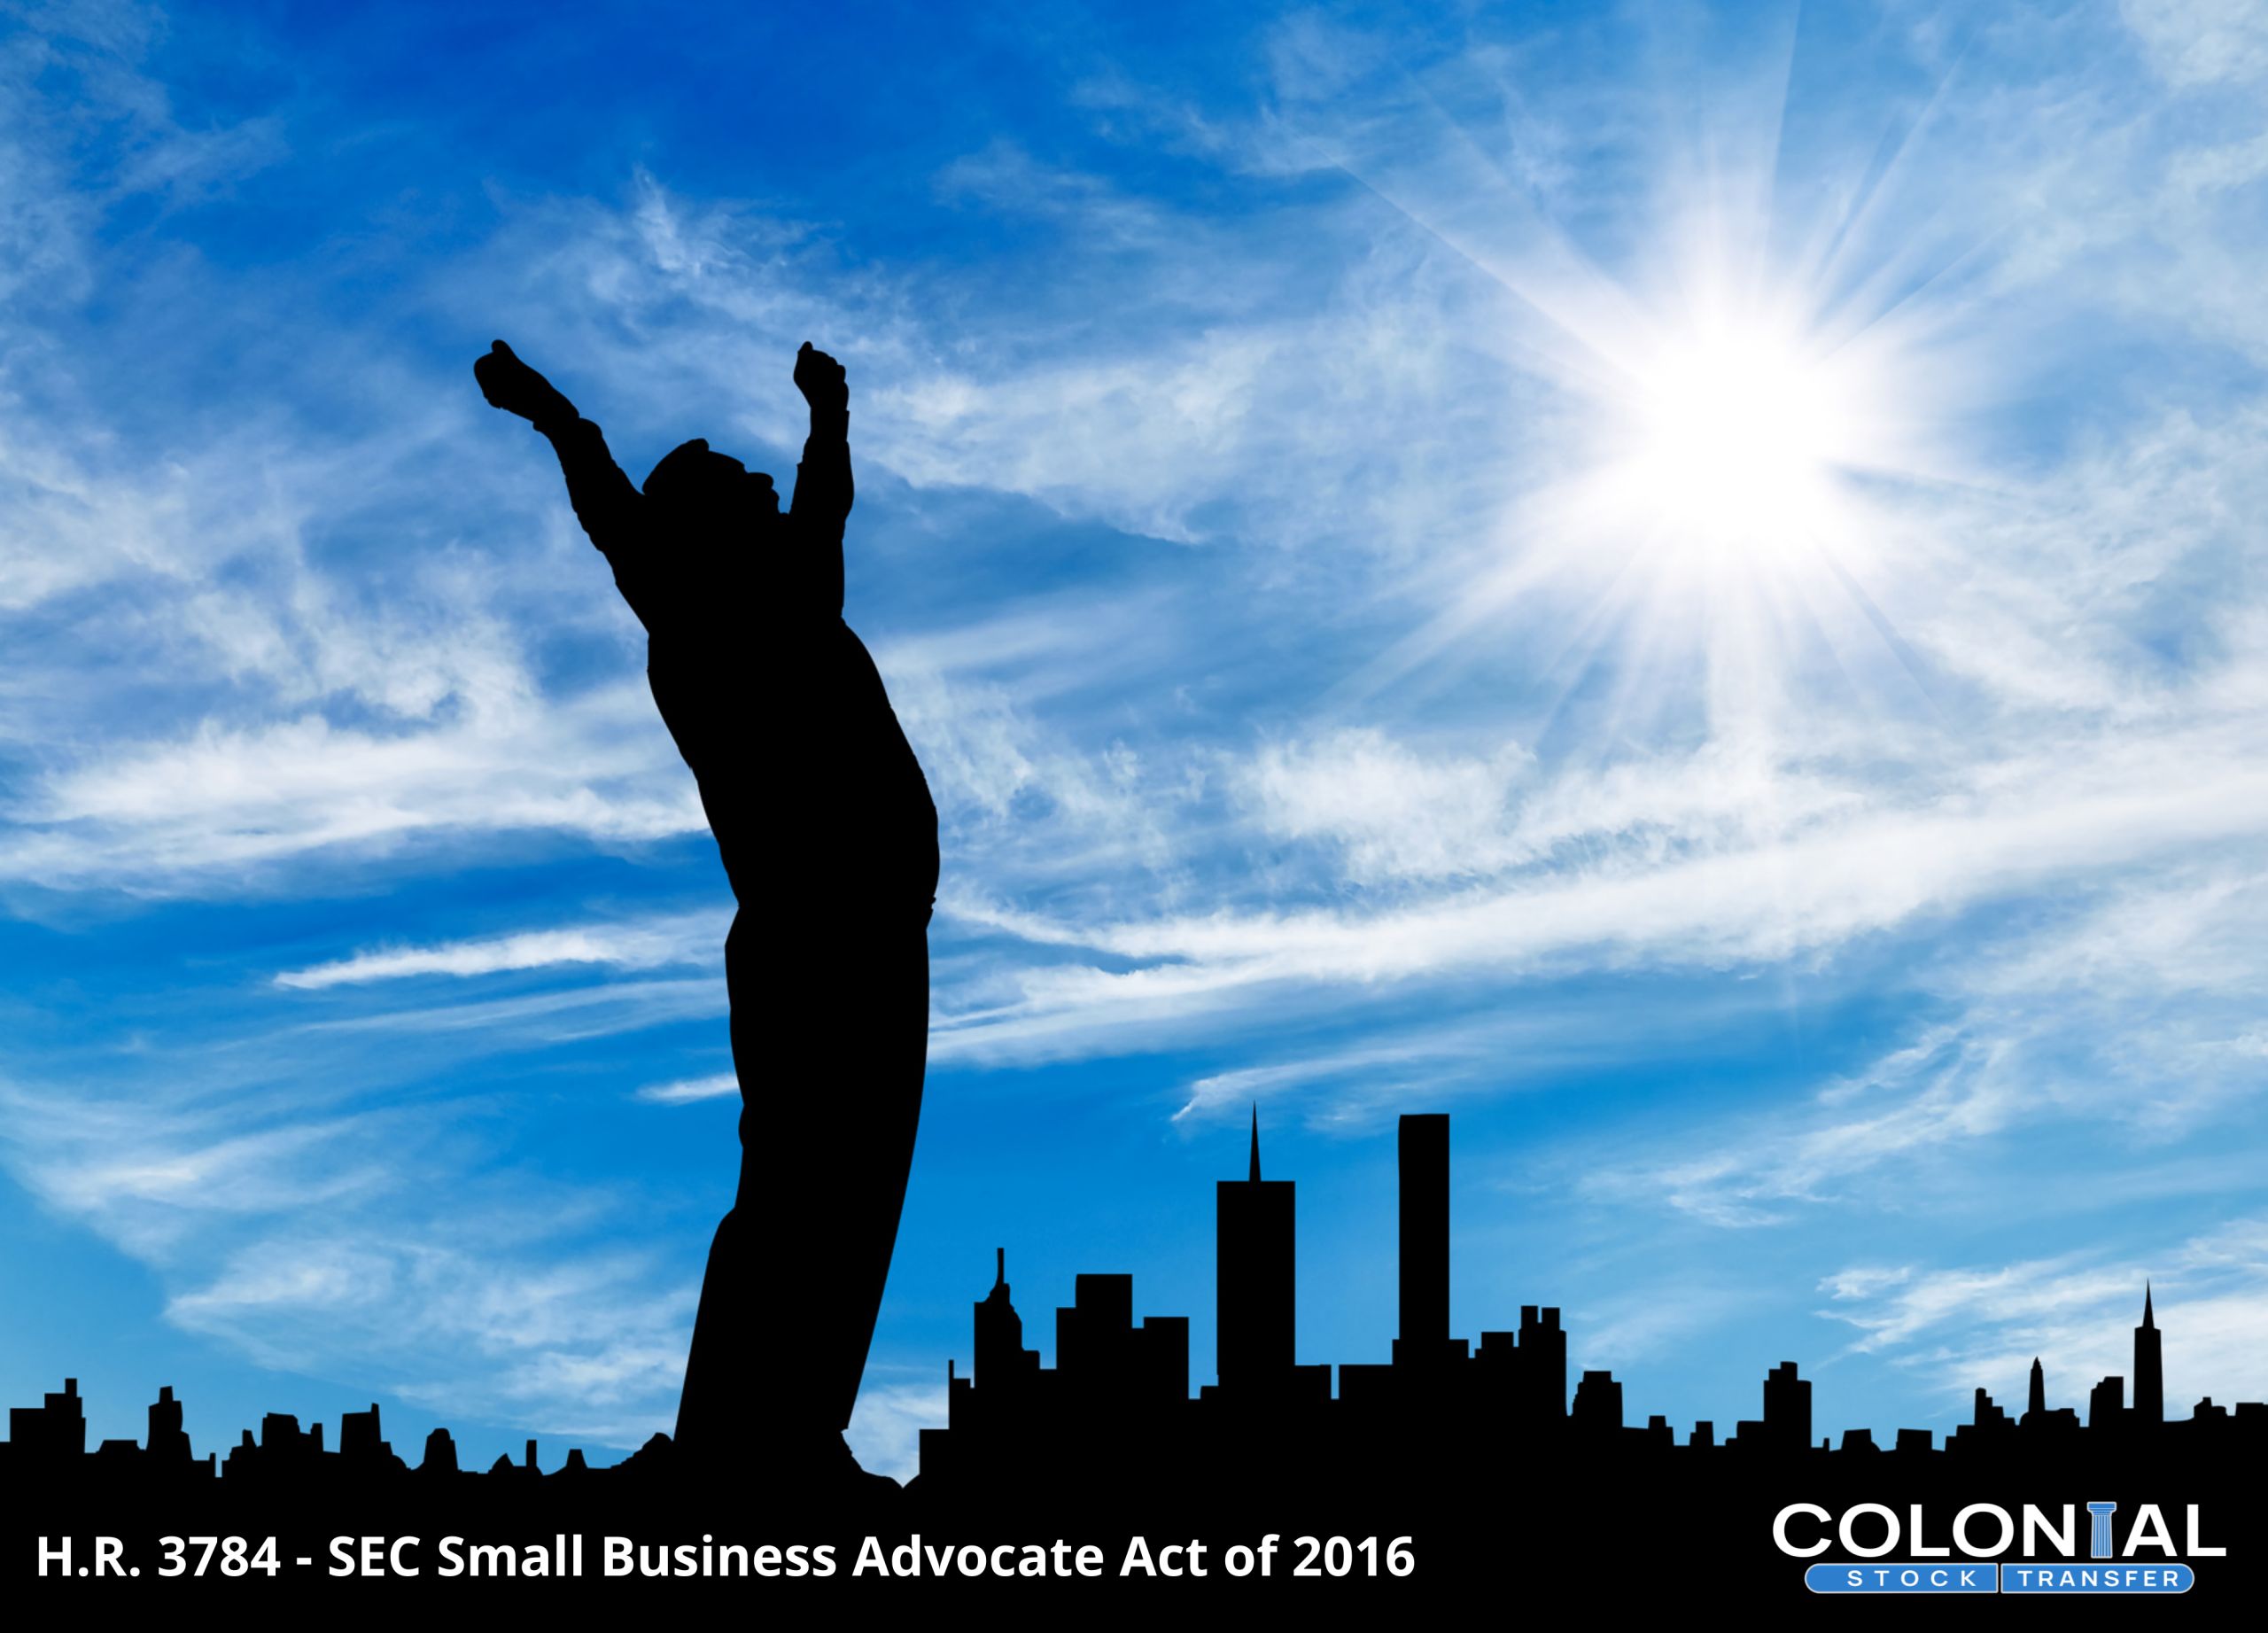 H.R. 3784 – SEC Small Business Advocate Act of 2016